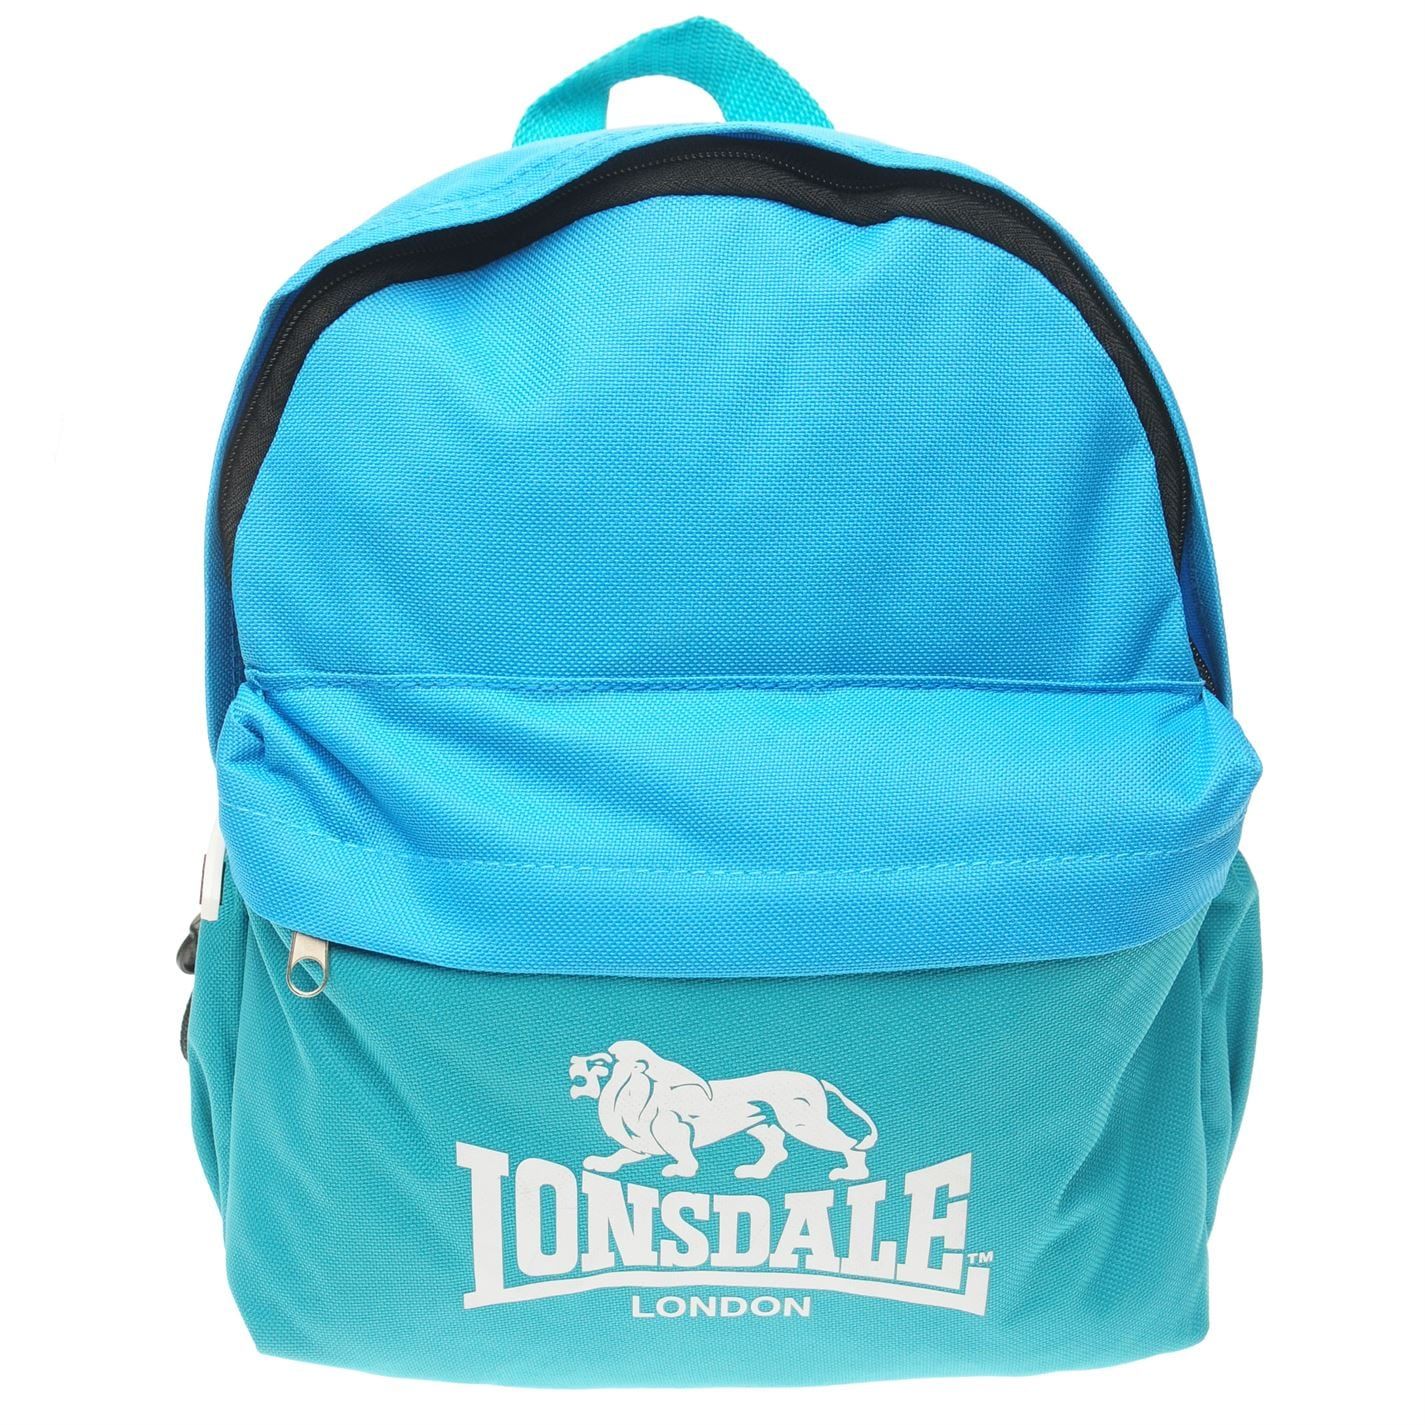 Lonsdale Mini Back Pack Travel Luggage Everyday Casual Bag Accessories